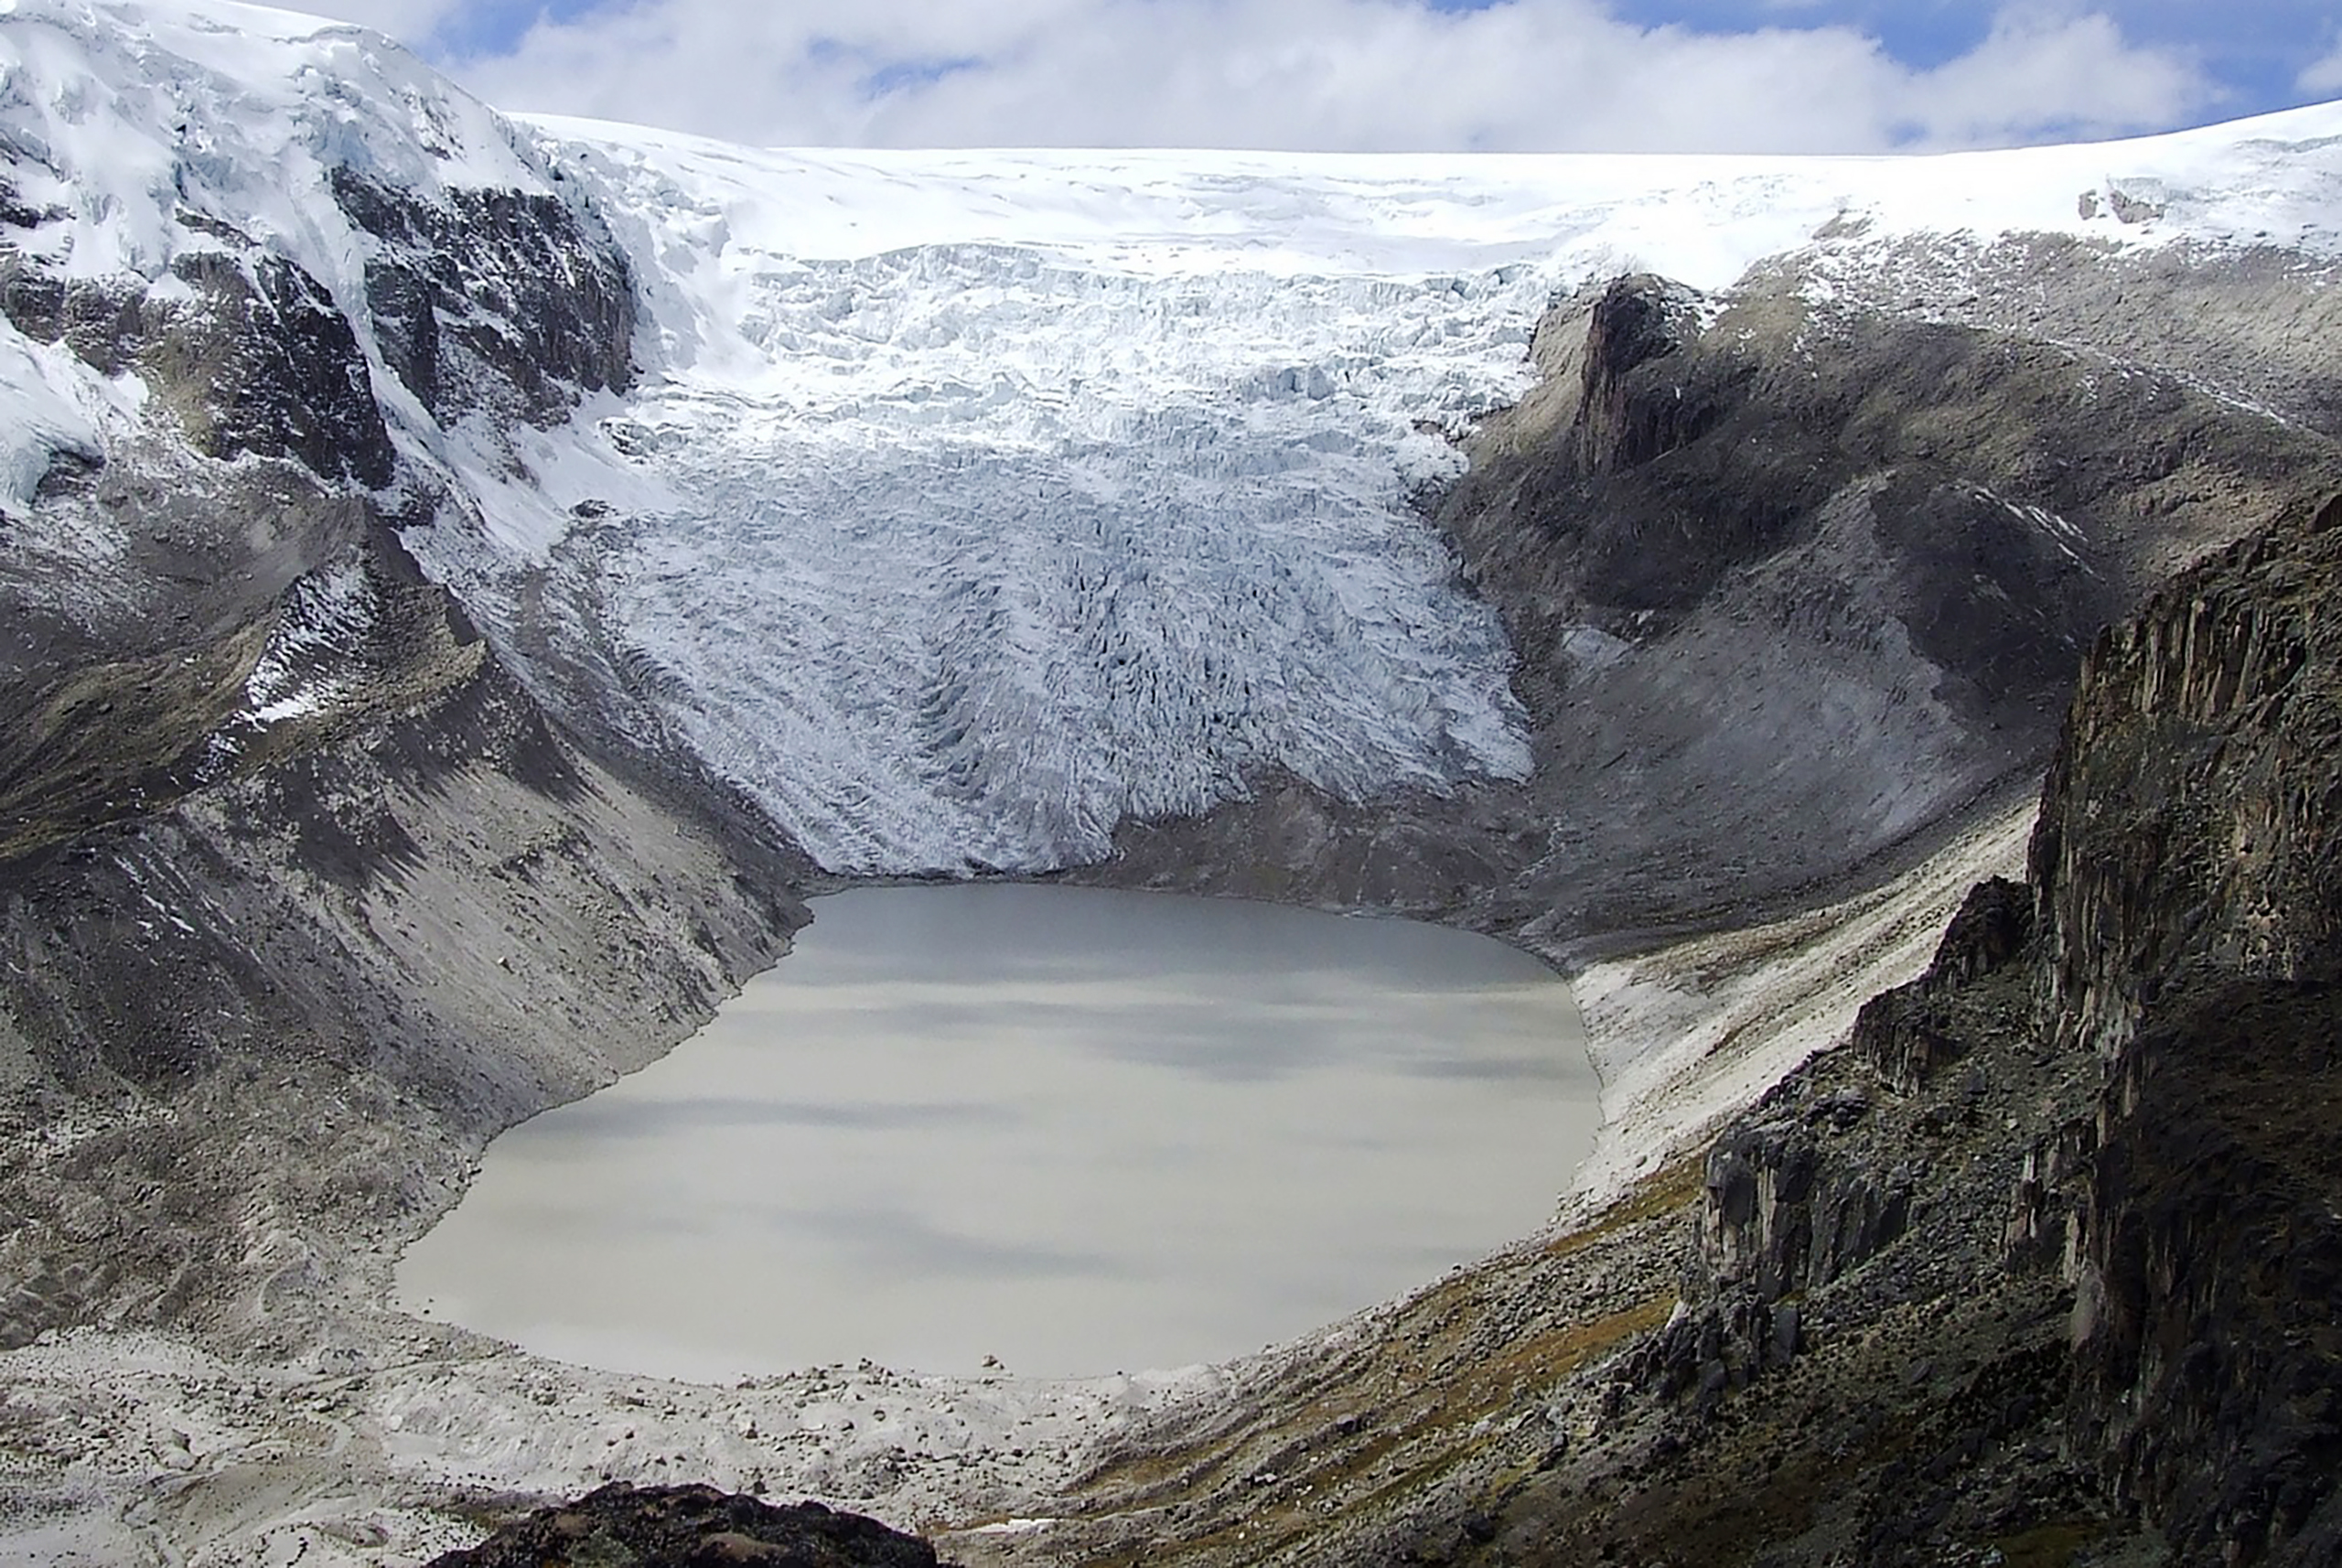 NASA images show Qori Kalis (above), a glacier that is part of the world’s largest tropical ice cap, on a plateau 18,670 ft. (5,691 m) high in the Andes Mountains of Peru. In 1978, the glacier was still expanding. But not anymore. By 2011, it had retreated far enough to leave a lake 86 acres (35 hectares) in area and 200 ft. (60 m) deep. Human-influenced climate change has also contributed to the retreat of Muir and Riggs Glaciers (next pages), in Alaska. (Courtesy of NASA)